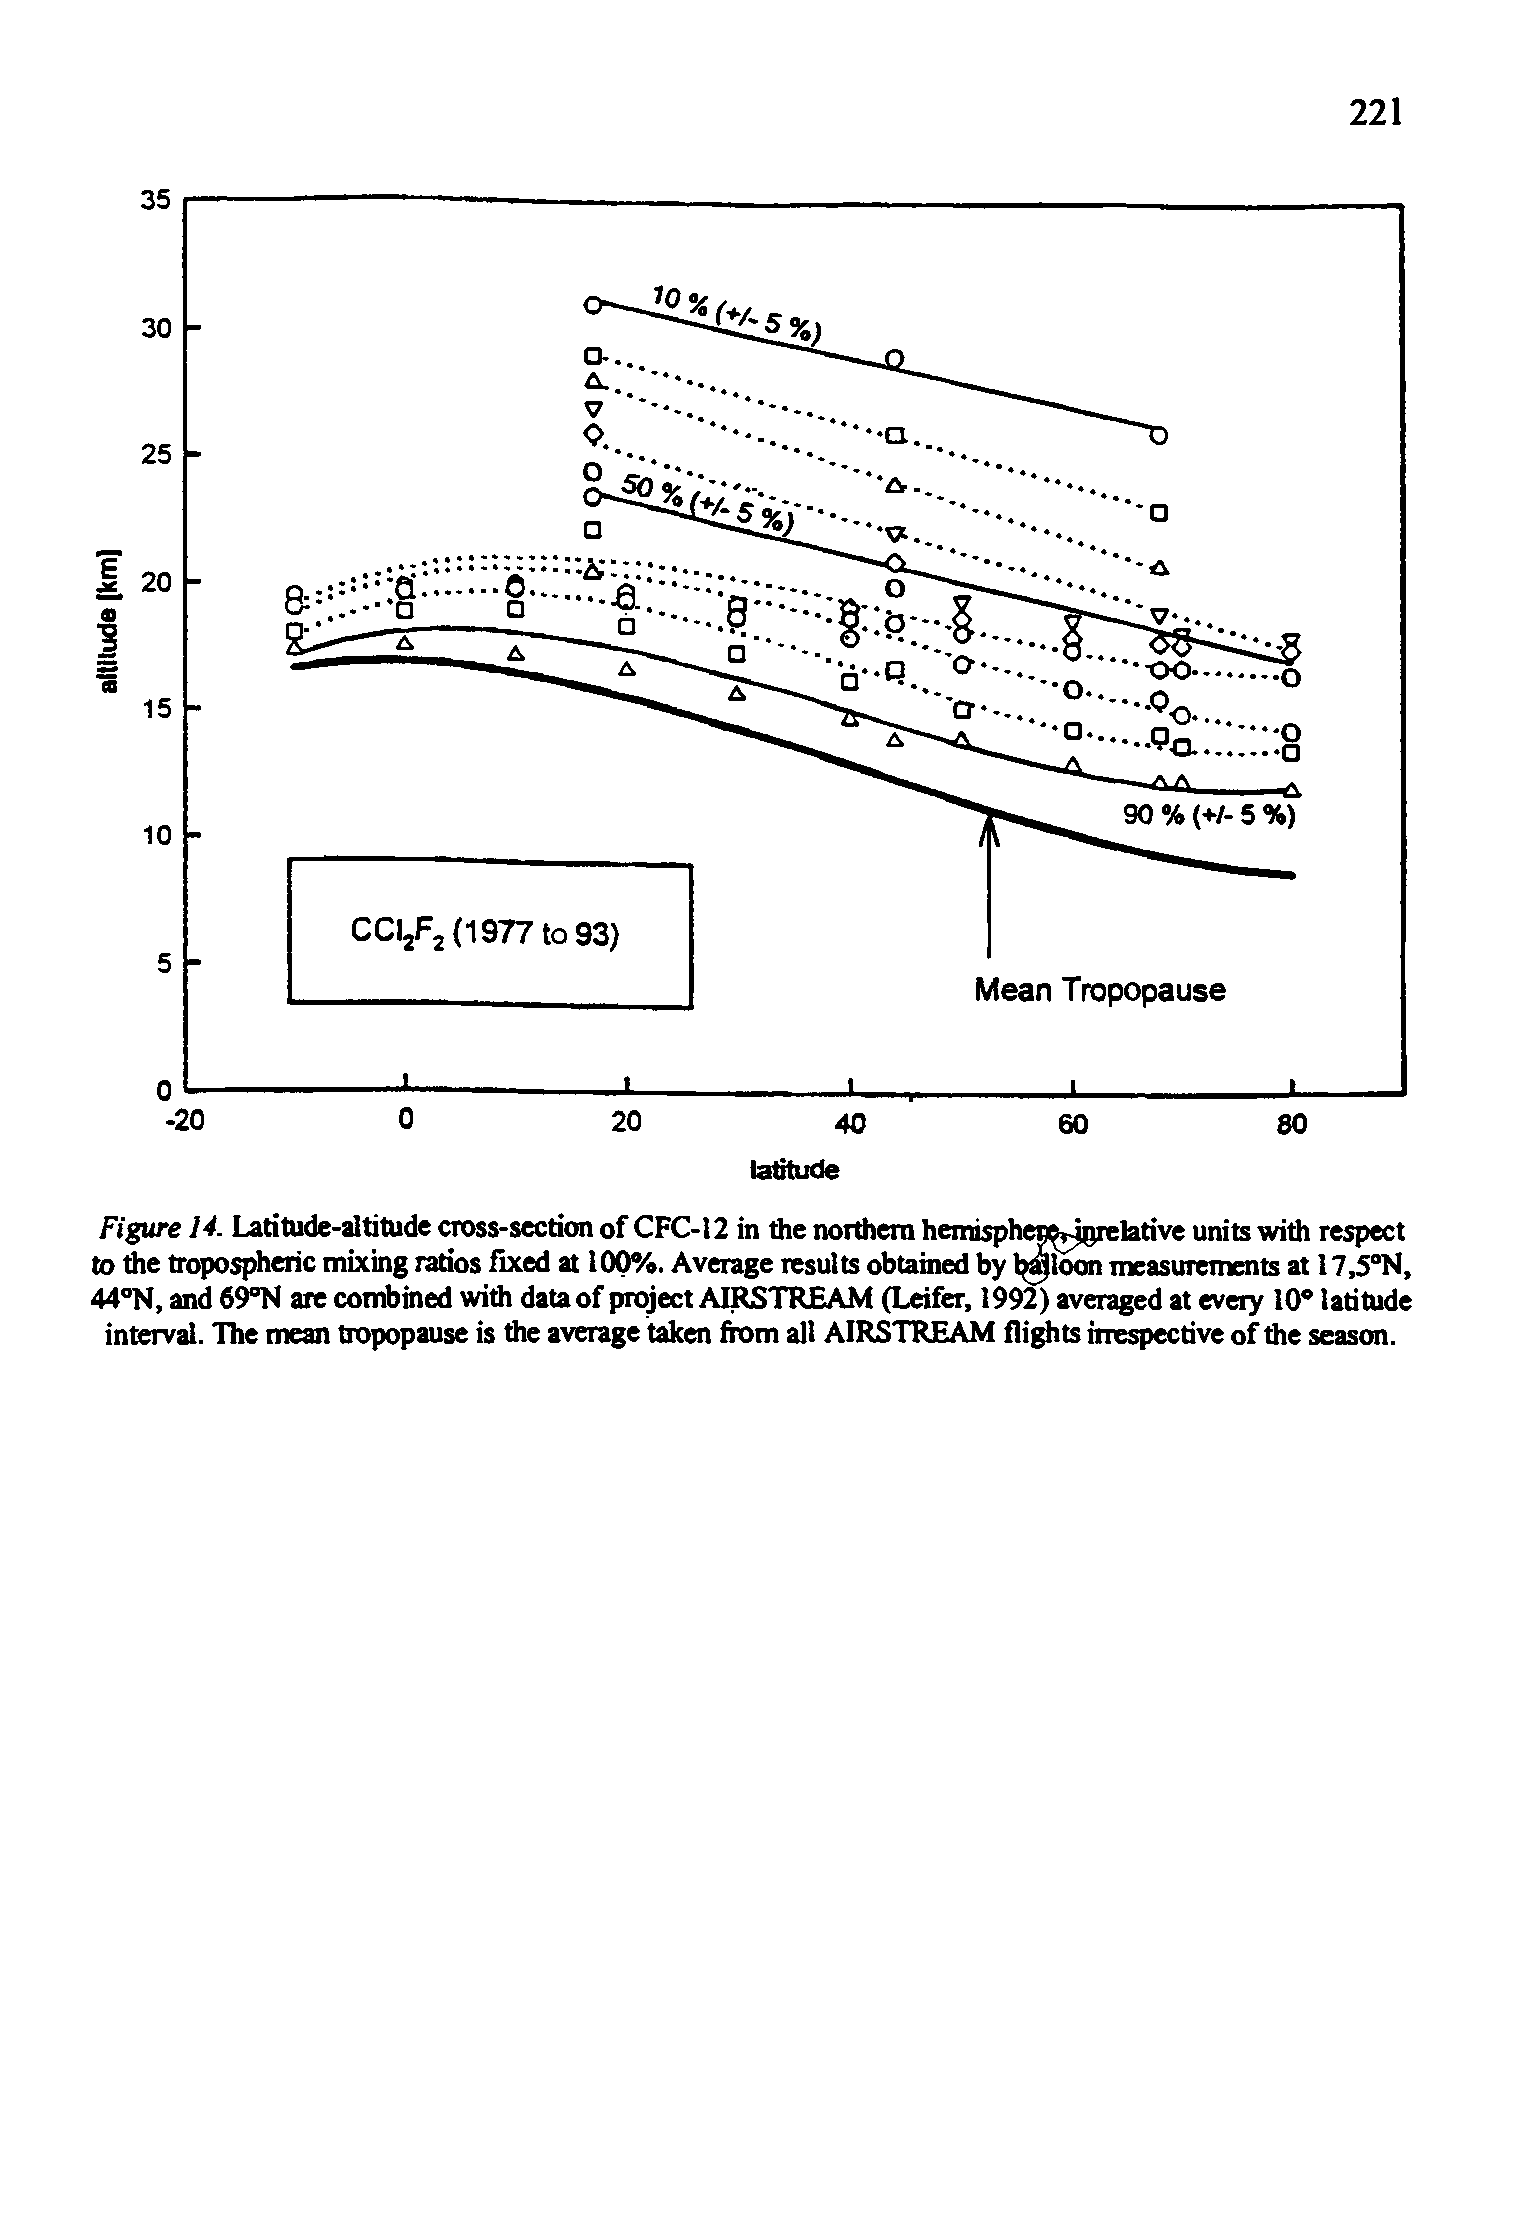 Figure 14 Latitude-altitude cross-section of CFC-12 in the northern hemisphewHorelative units with respect to the tropospheric mixing ratios fixed at 100%. Average results obtained by l loon measurements at 17,5°N, 44°N, and 69°N are combined with data of project AIRSTREAM (Leifer, 1992) averaged at every 10 latitude interval. The mean tropopause is the average taken from all AIRSTREAM flights irrespective of the season.